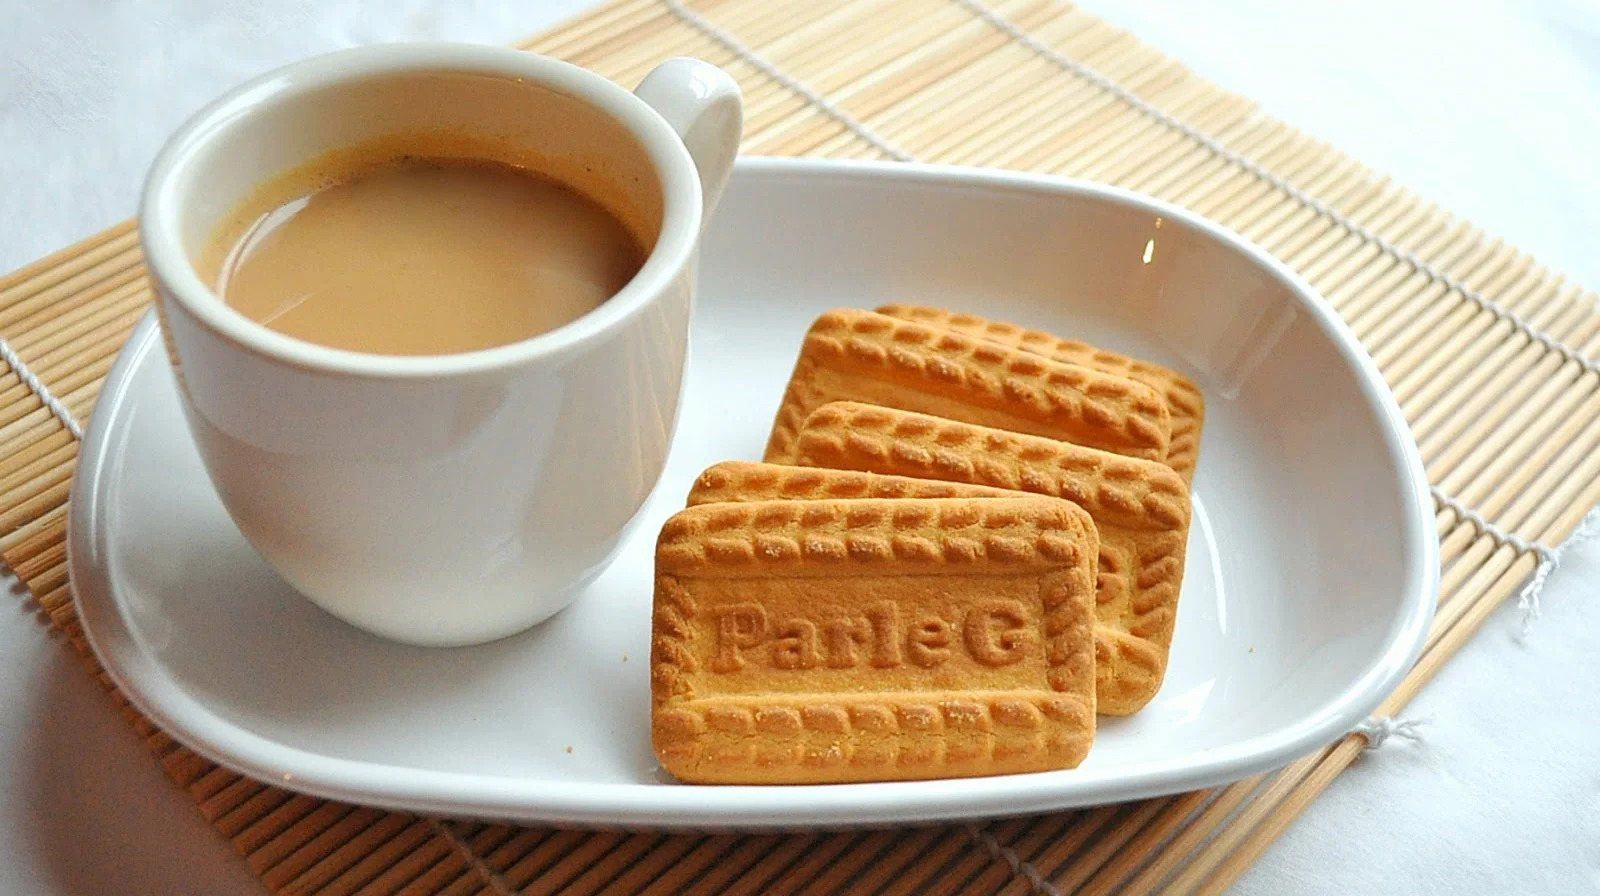 In India Parel-G biscuits are best enjoyed with tea